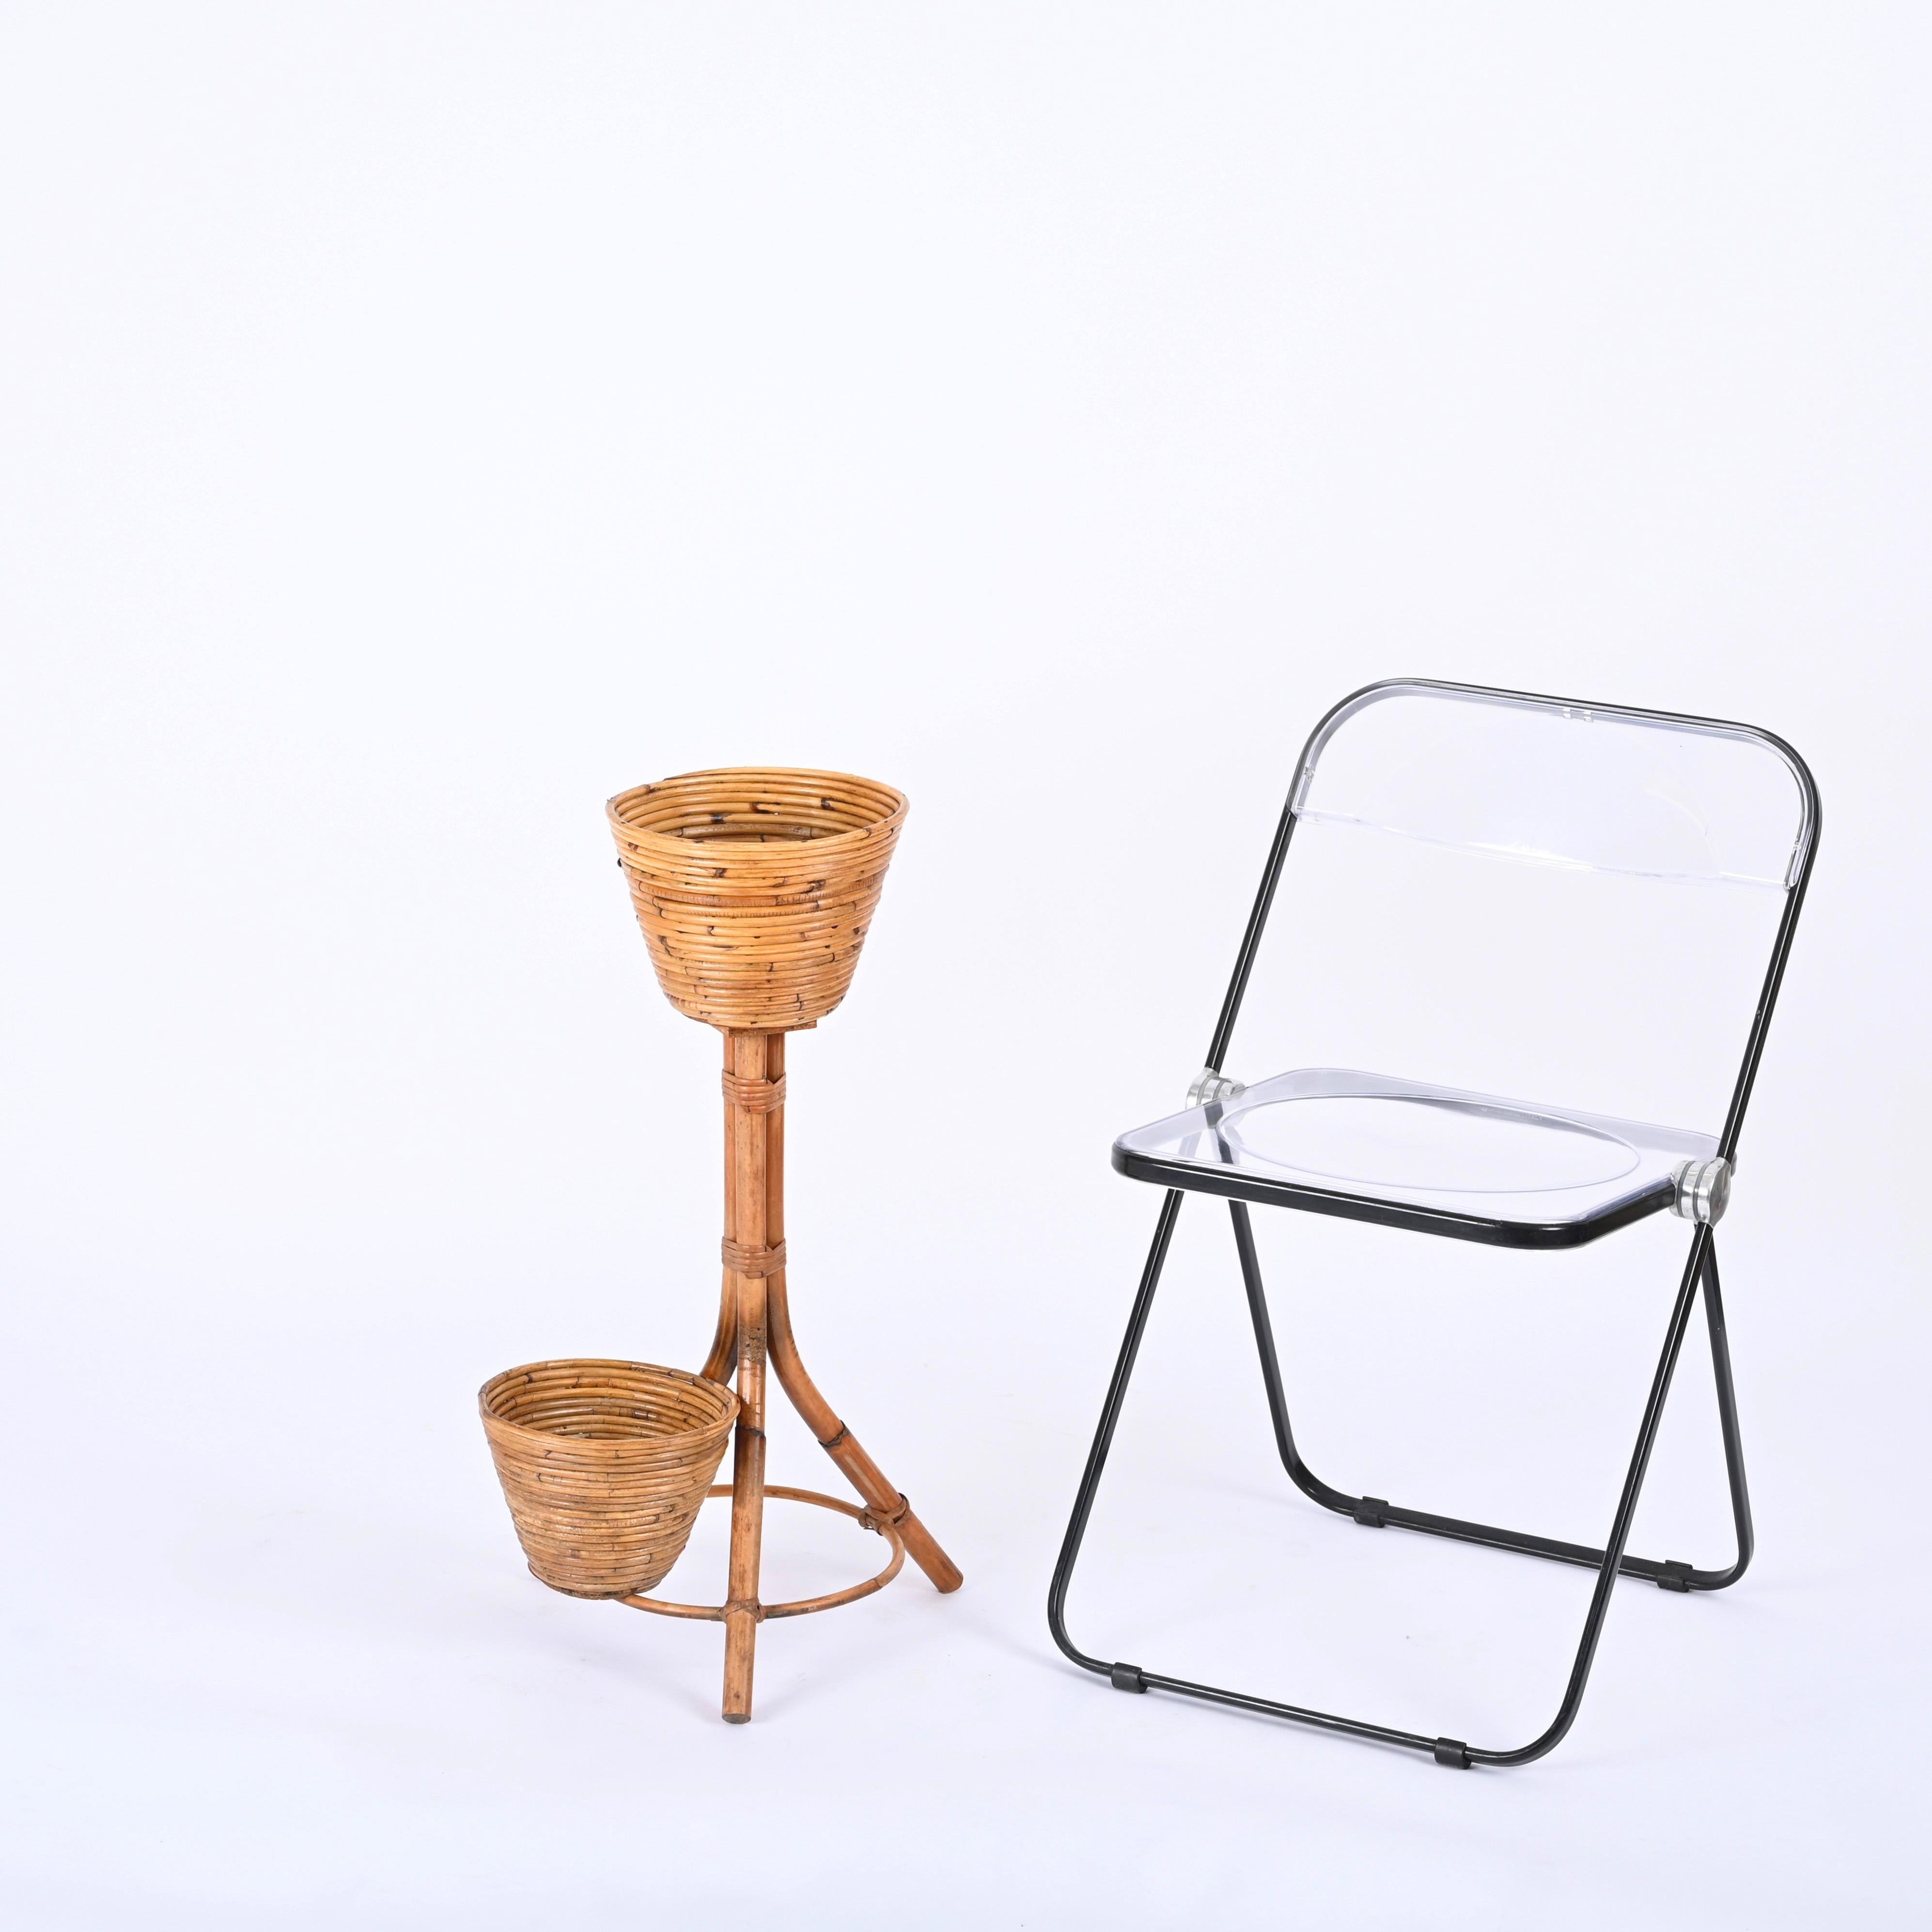 Beautiful Mid-Century flower or plant stand in curved rattan, bamboo and wicker. This lovely object was designed in Italy in the 1960s and is attributed to Vivai del Sud.

This magnificent plant stand has a solid tripod base in curved bamboo enrich